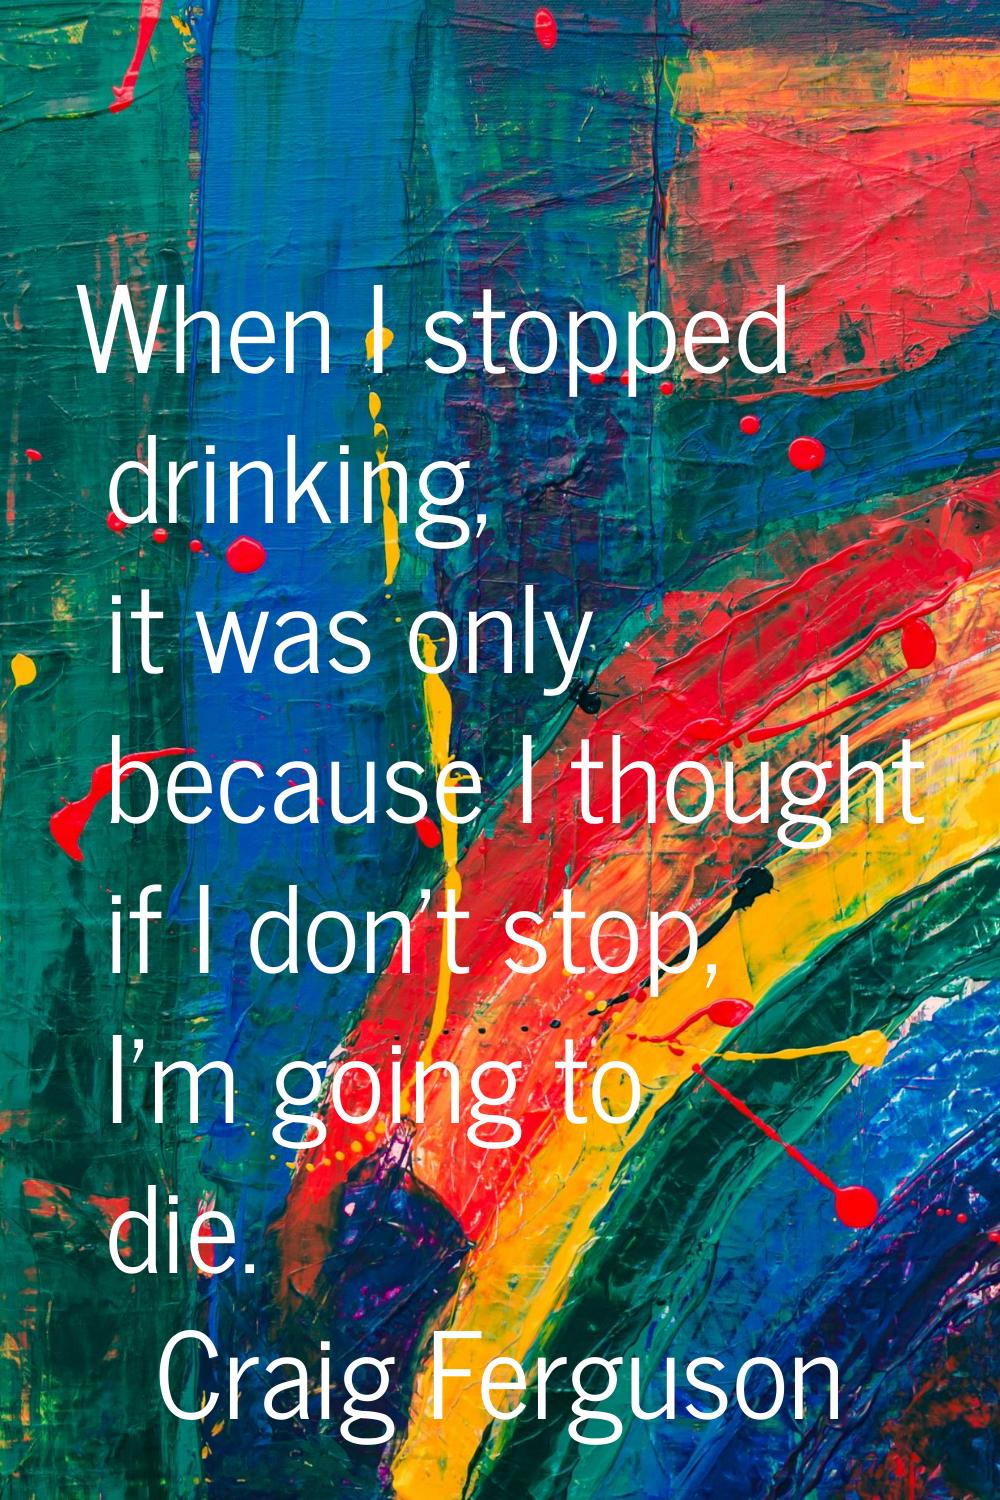 When I stopped drinking, it was only because I thought if I don't stop, I'm going to die.